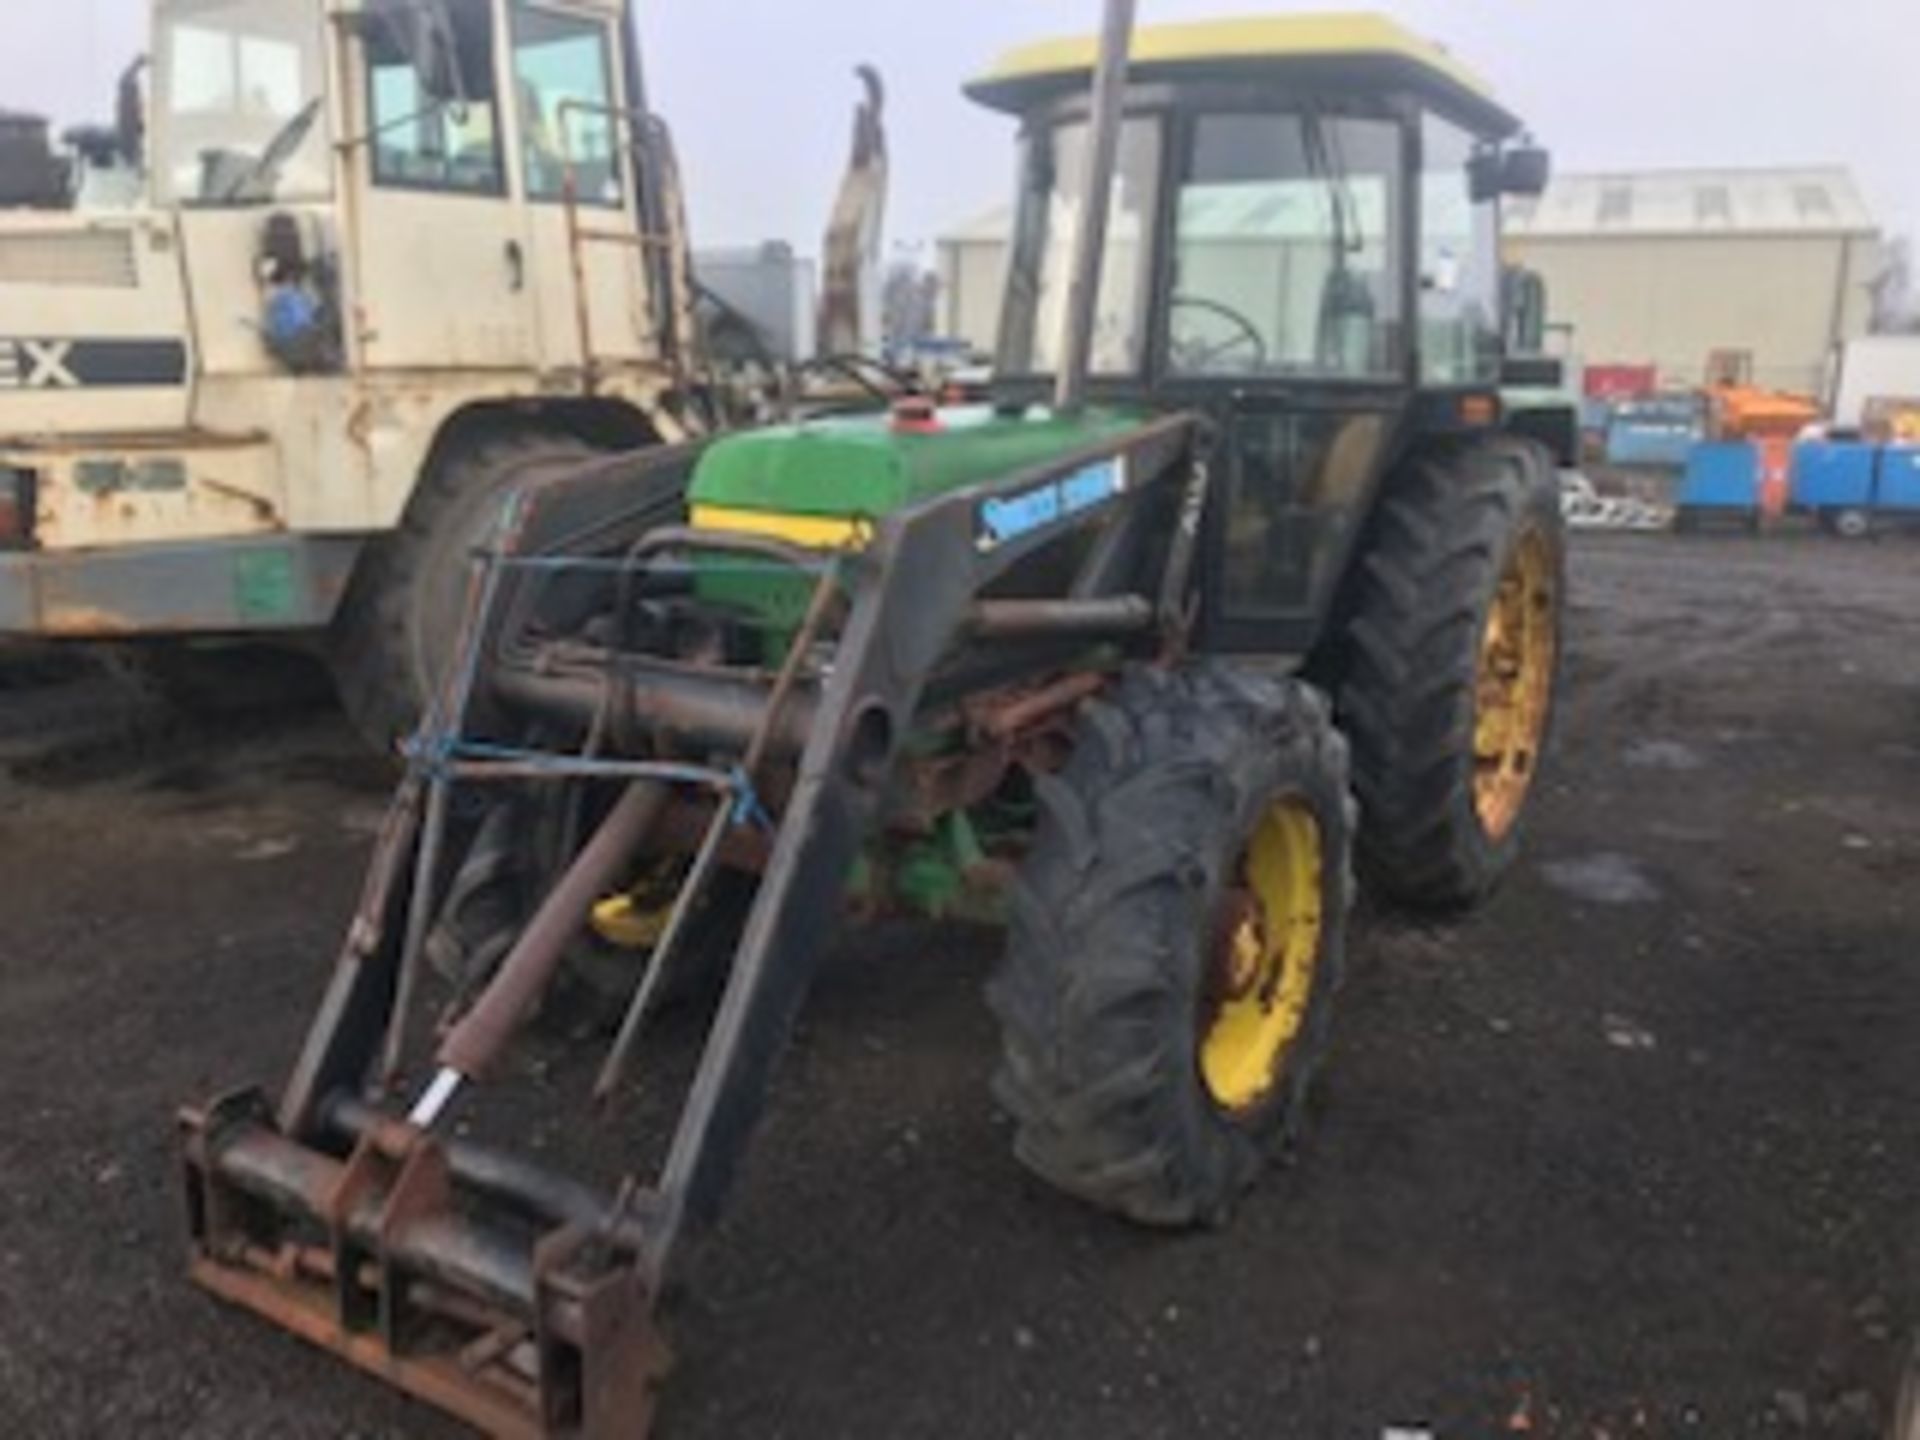 1985 JOHN DEERE 2040S XE SERIES QUICKE 2300 loader 4 wd Reg No B98 NSO S/N 544990 9418hrs (not verif - Image 2 of 4